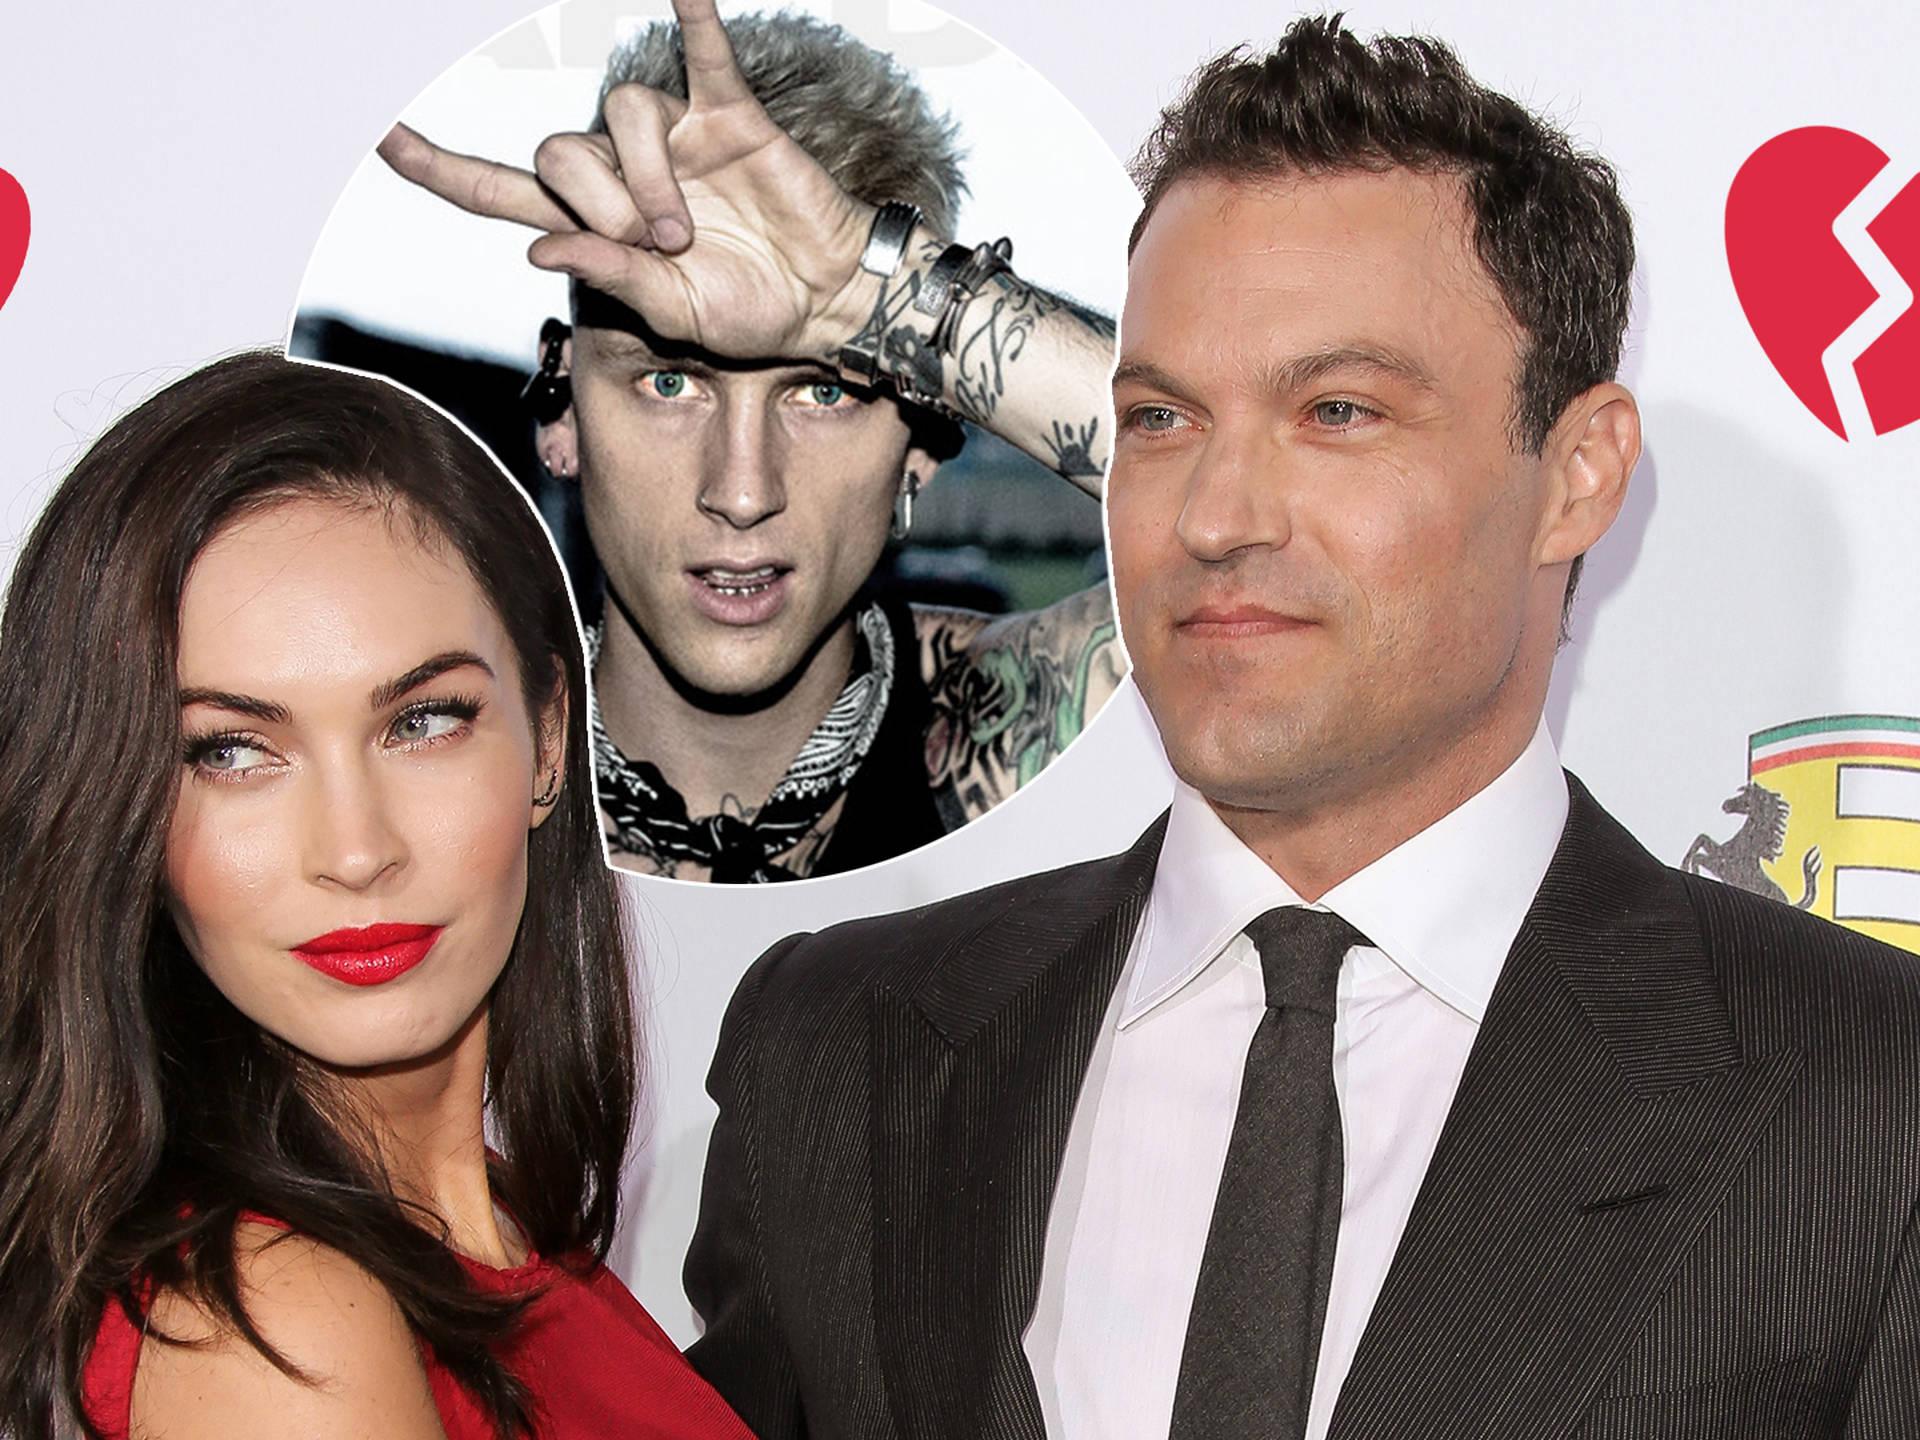 Megan Fox and Brian Austin Green split after she's spotted with Machine Gun  Kelly - Capital